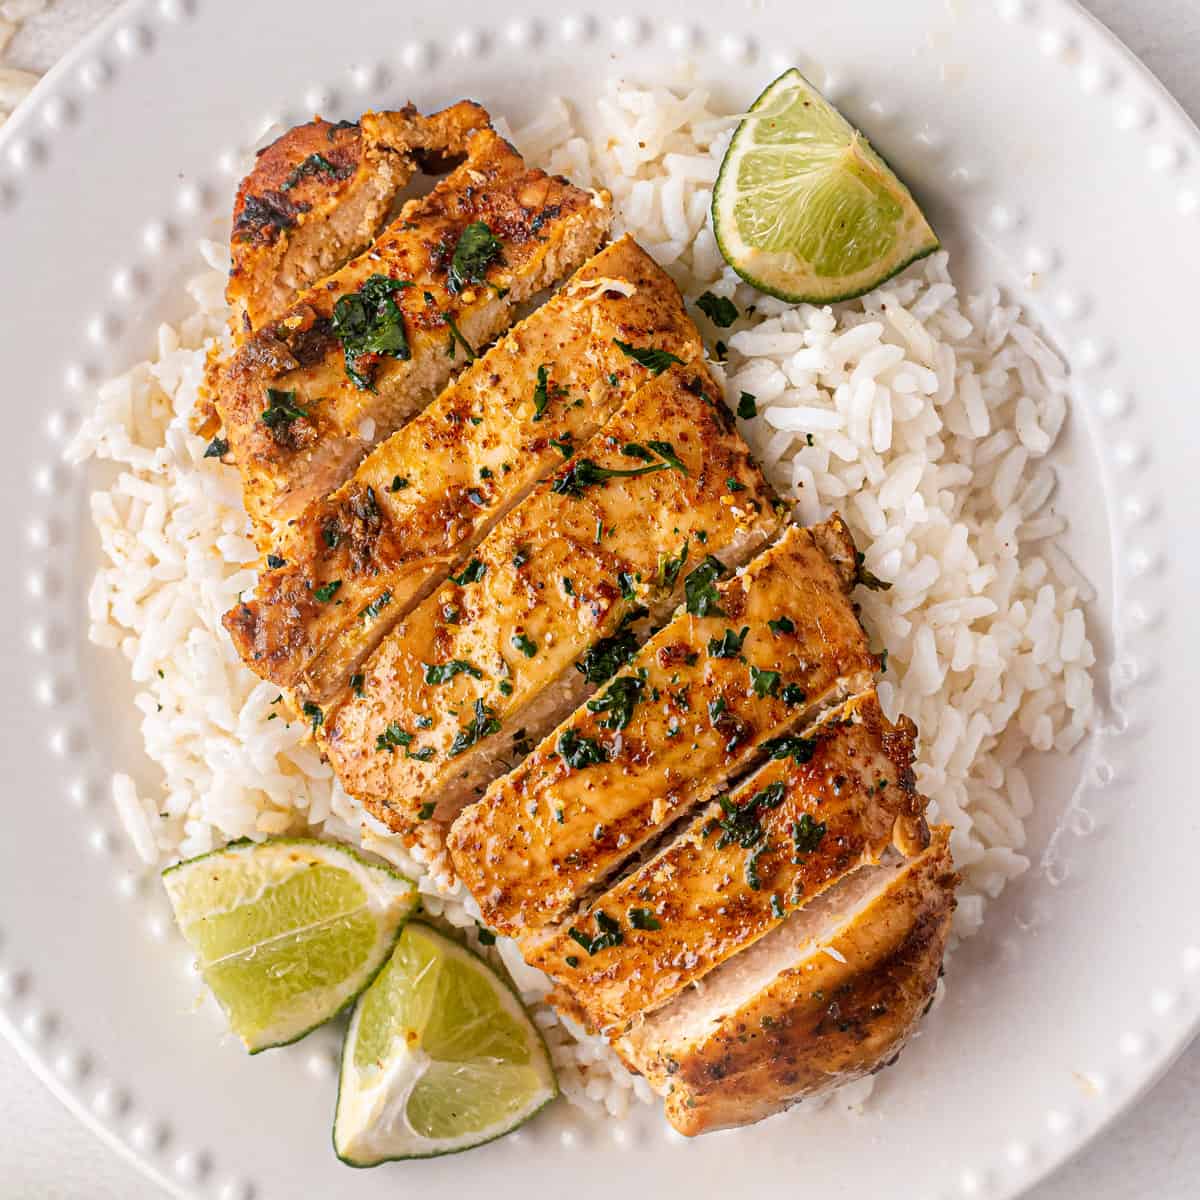 https://www.thechunkychef.com/wp-content/uploads/2022/04/Grilled-Tequila-Lime-Chicken-recipe-card.jpg